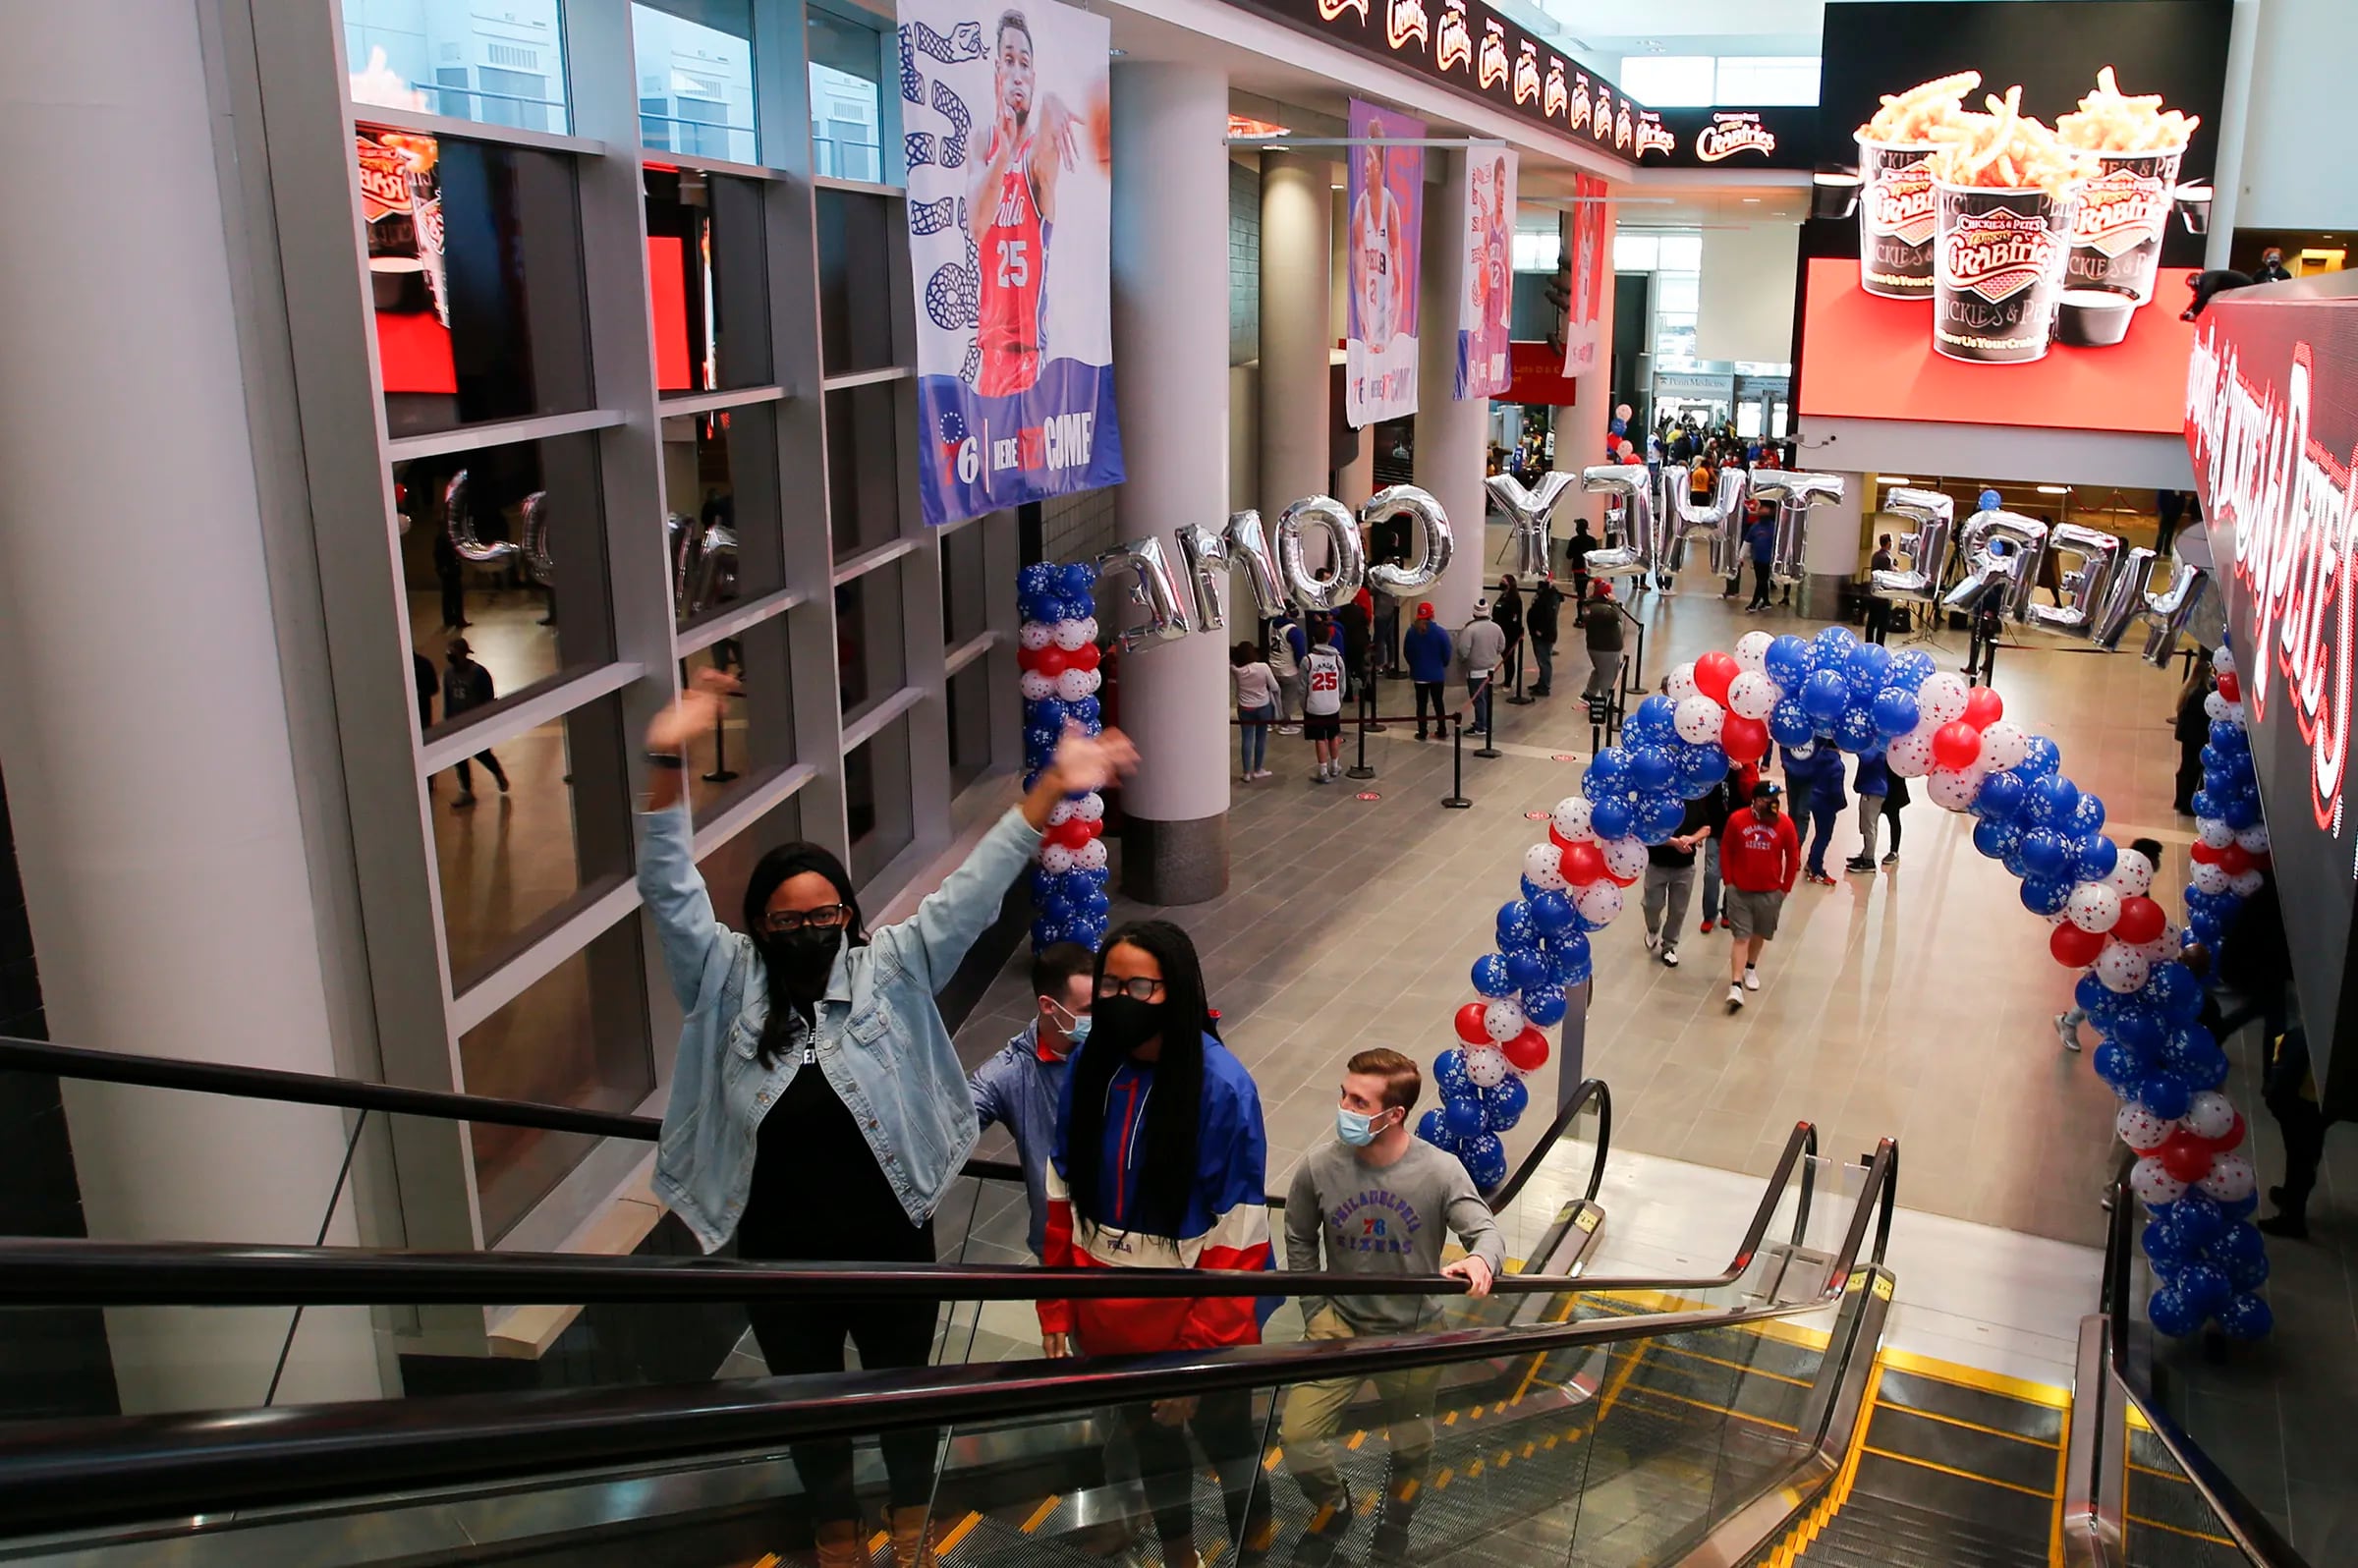 Wells Fargo Center to welcome Sixers fans back after All-Star break -  Liberty Ballers